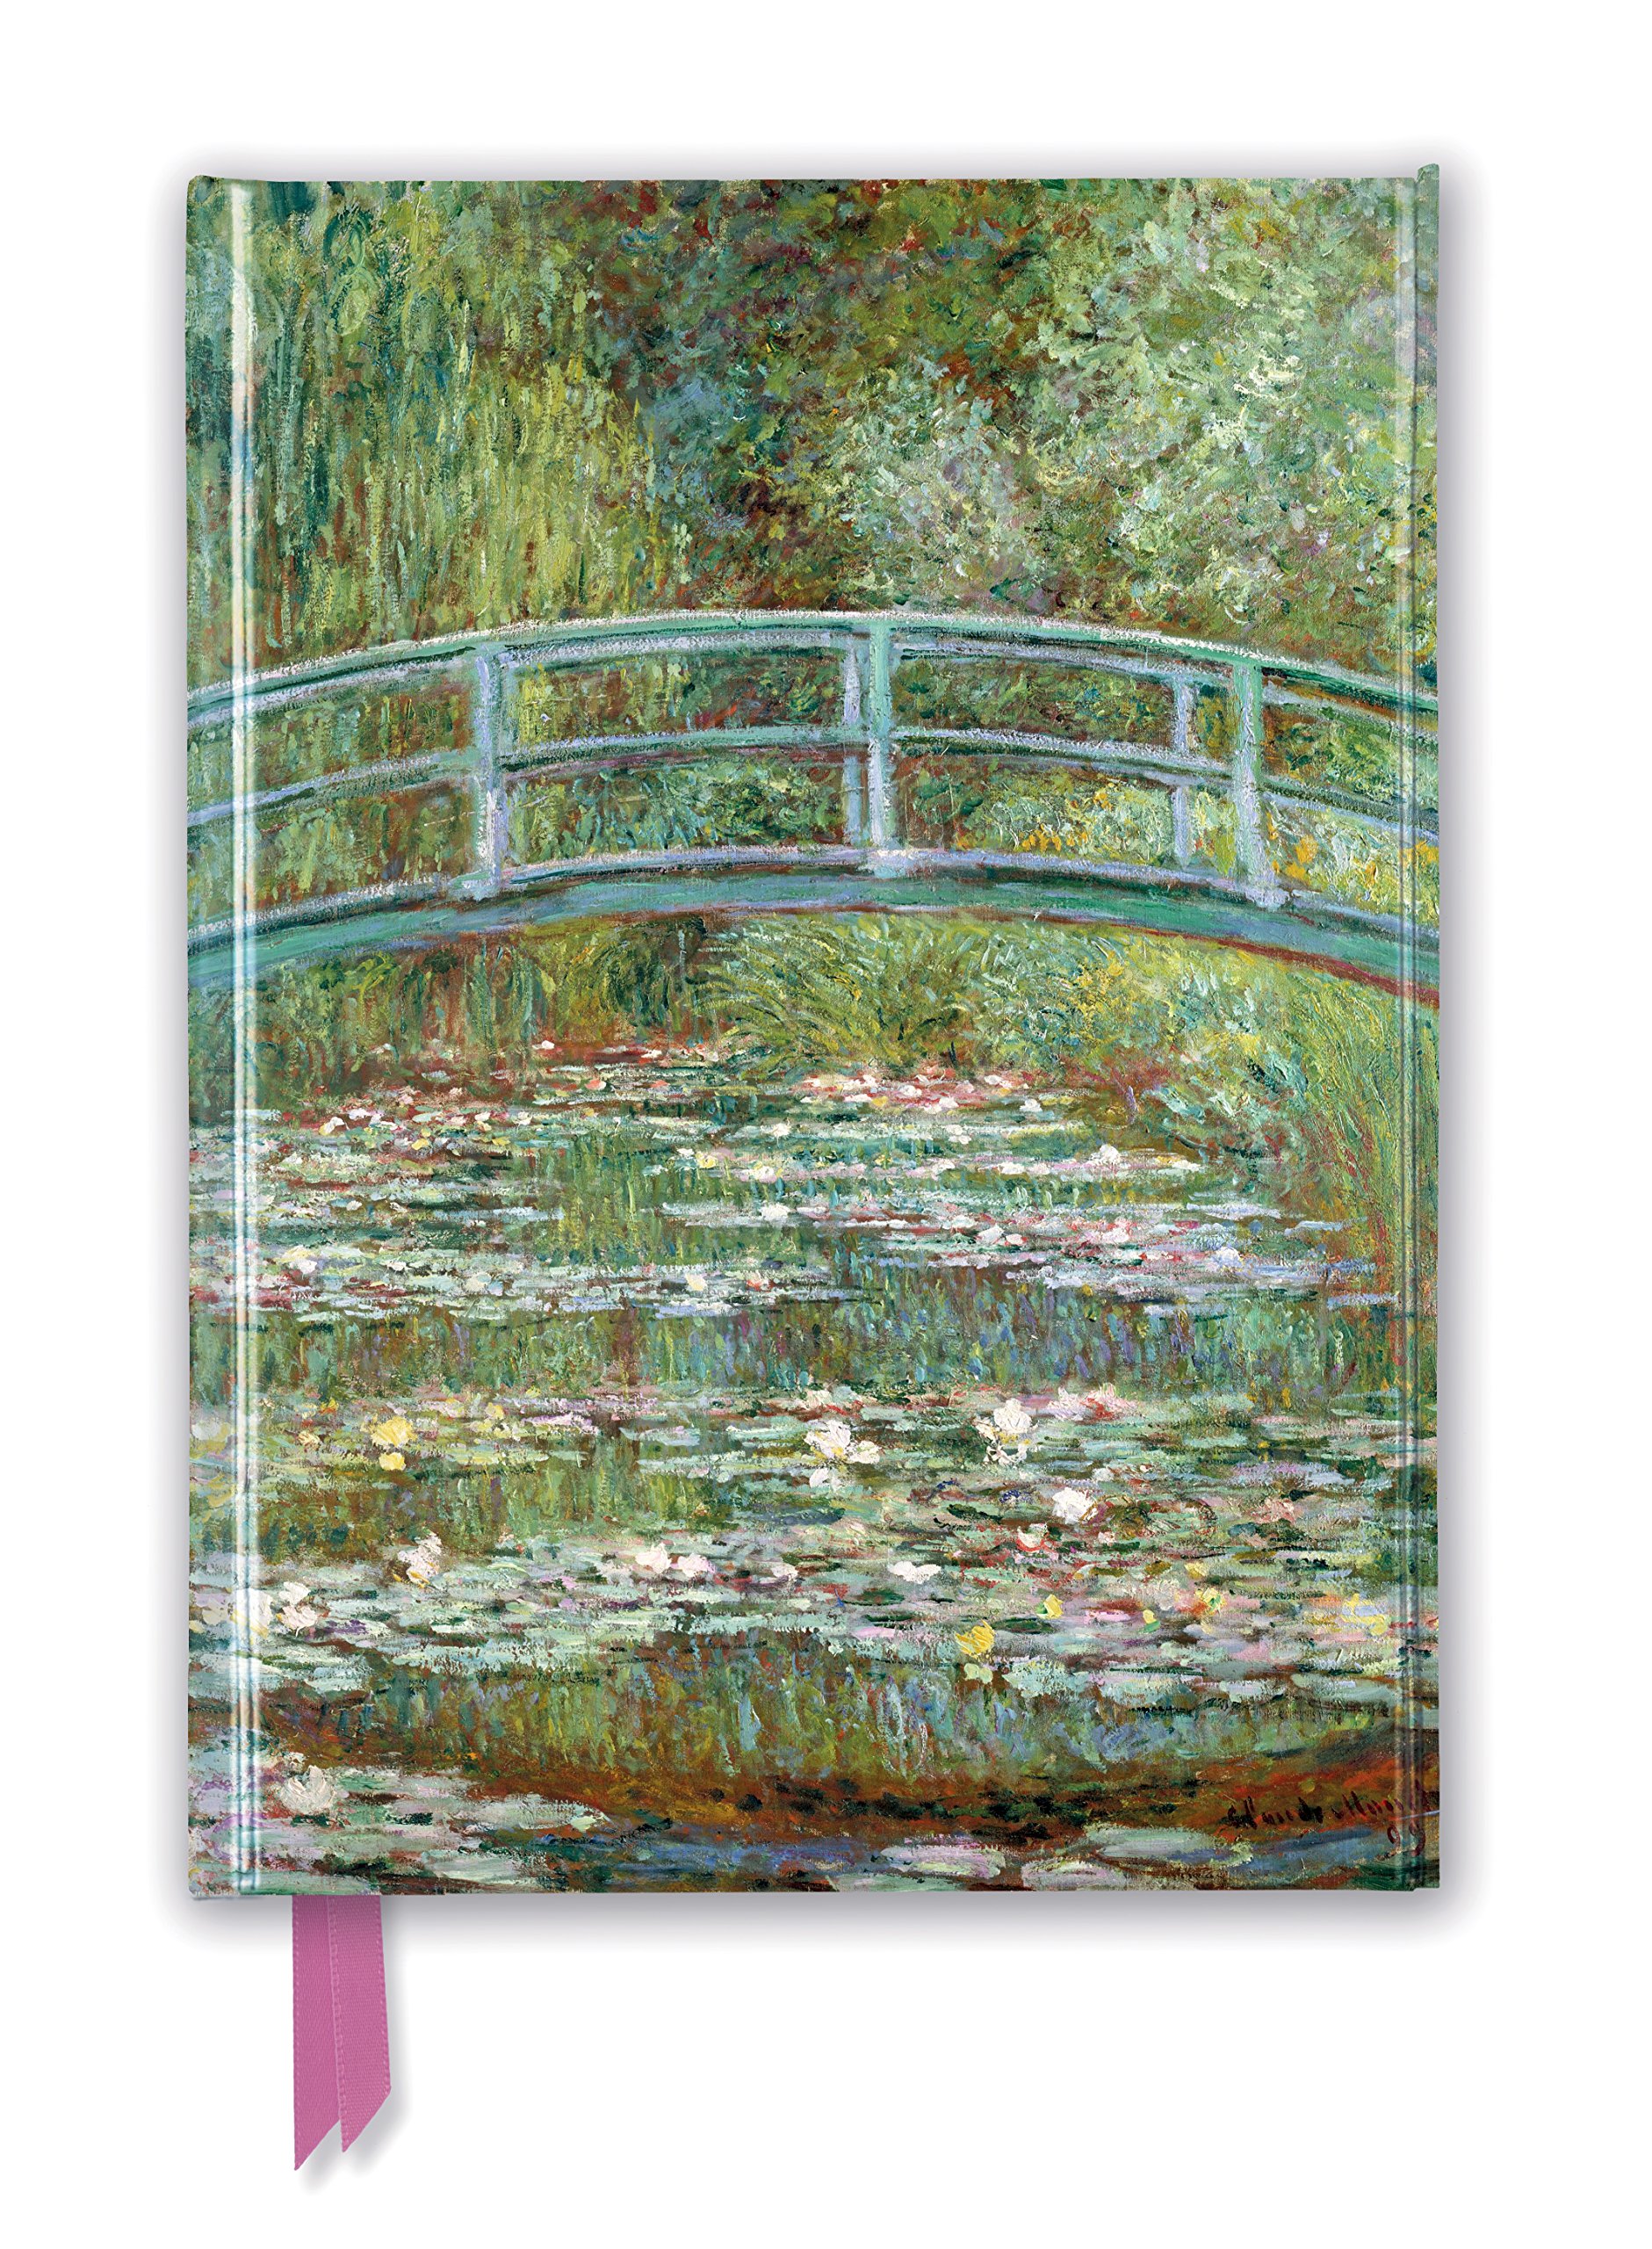 Jurnal - Claude Monet - Bridge over a Pond of Water Lilies | Flame Tree Publishing